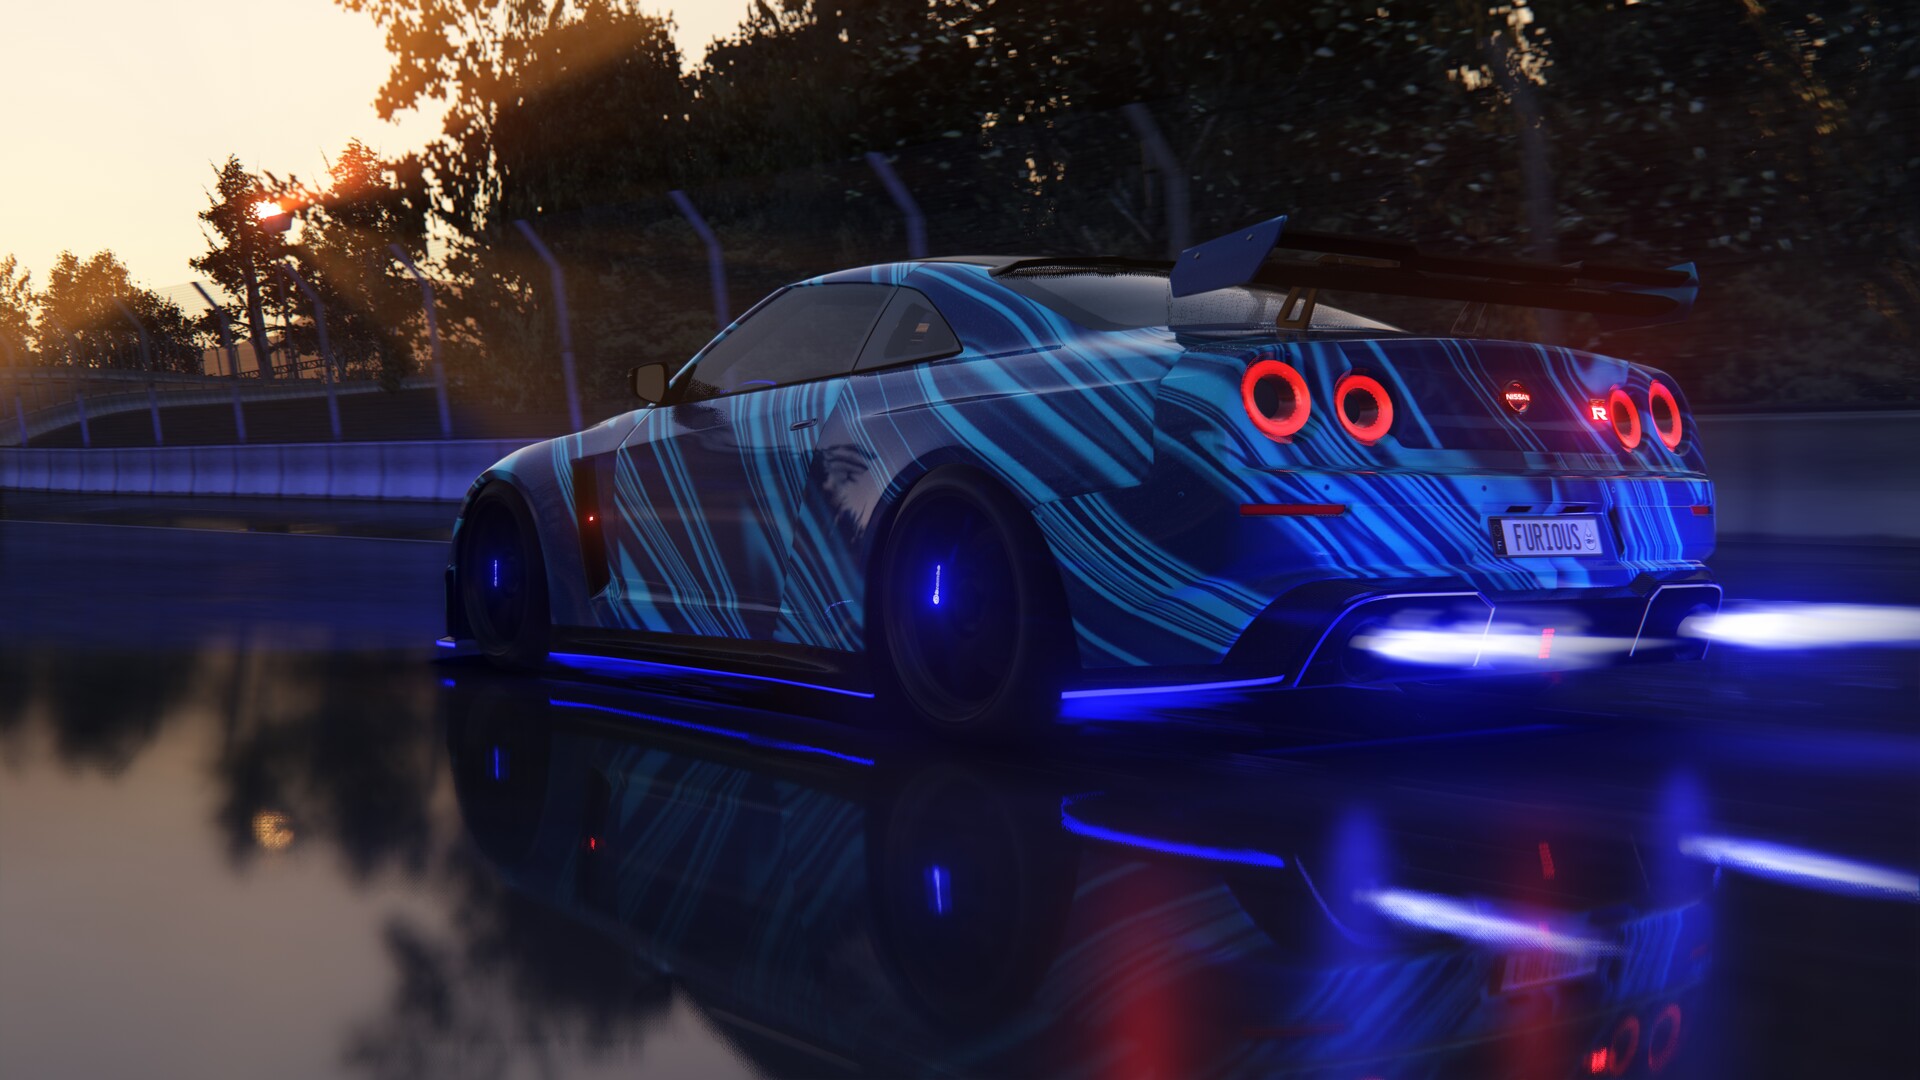 SpeedVibes - Introducing the Nissan Skyline R36 GT-R APX